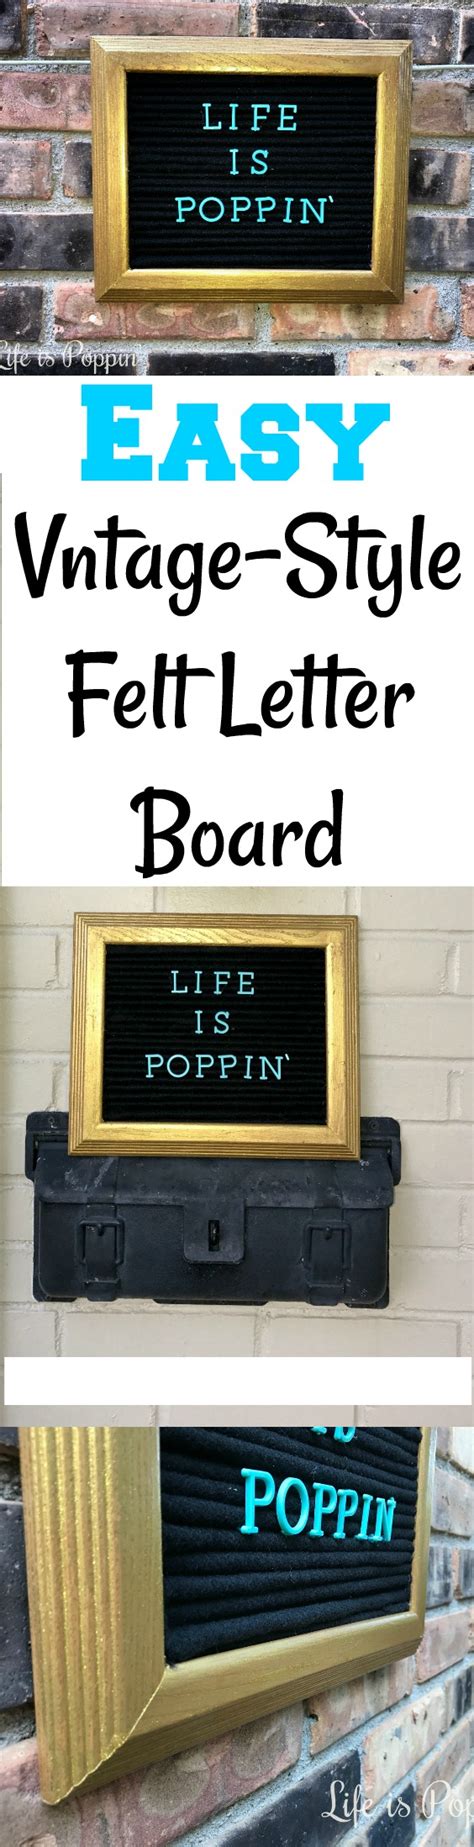 These Vintage Style Felt Letter Boards Are The Perfect Way To Jazz Up